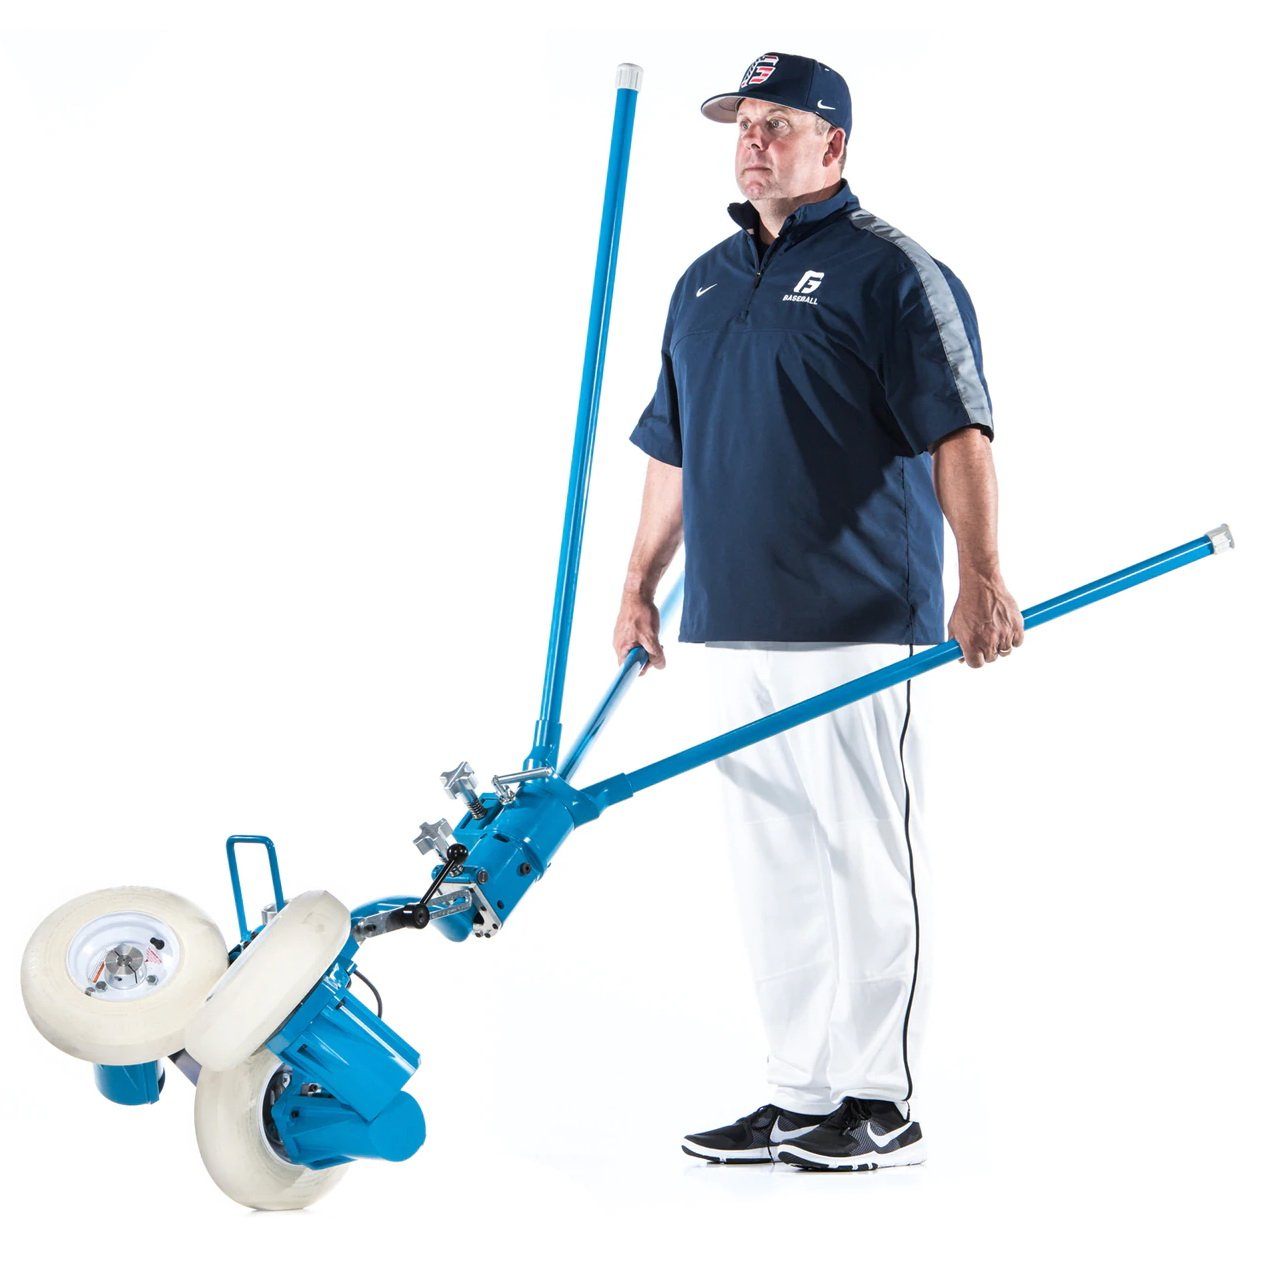 Jugs BP®3 Pitching Machine for Baseball Being Transported